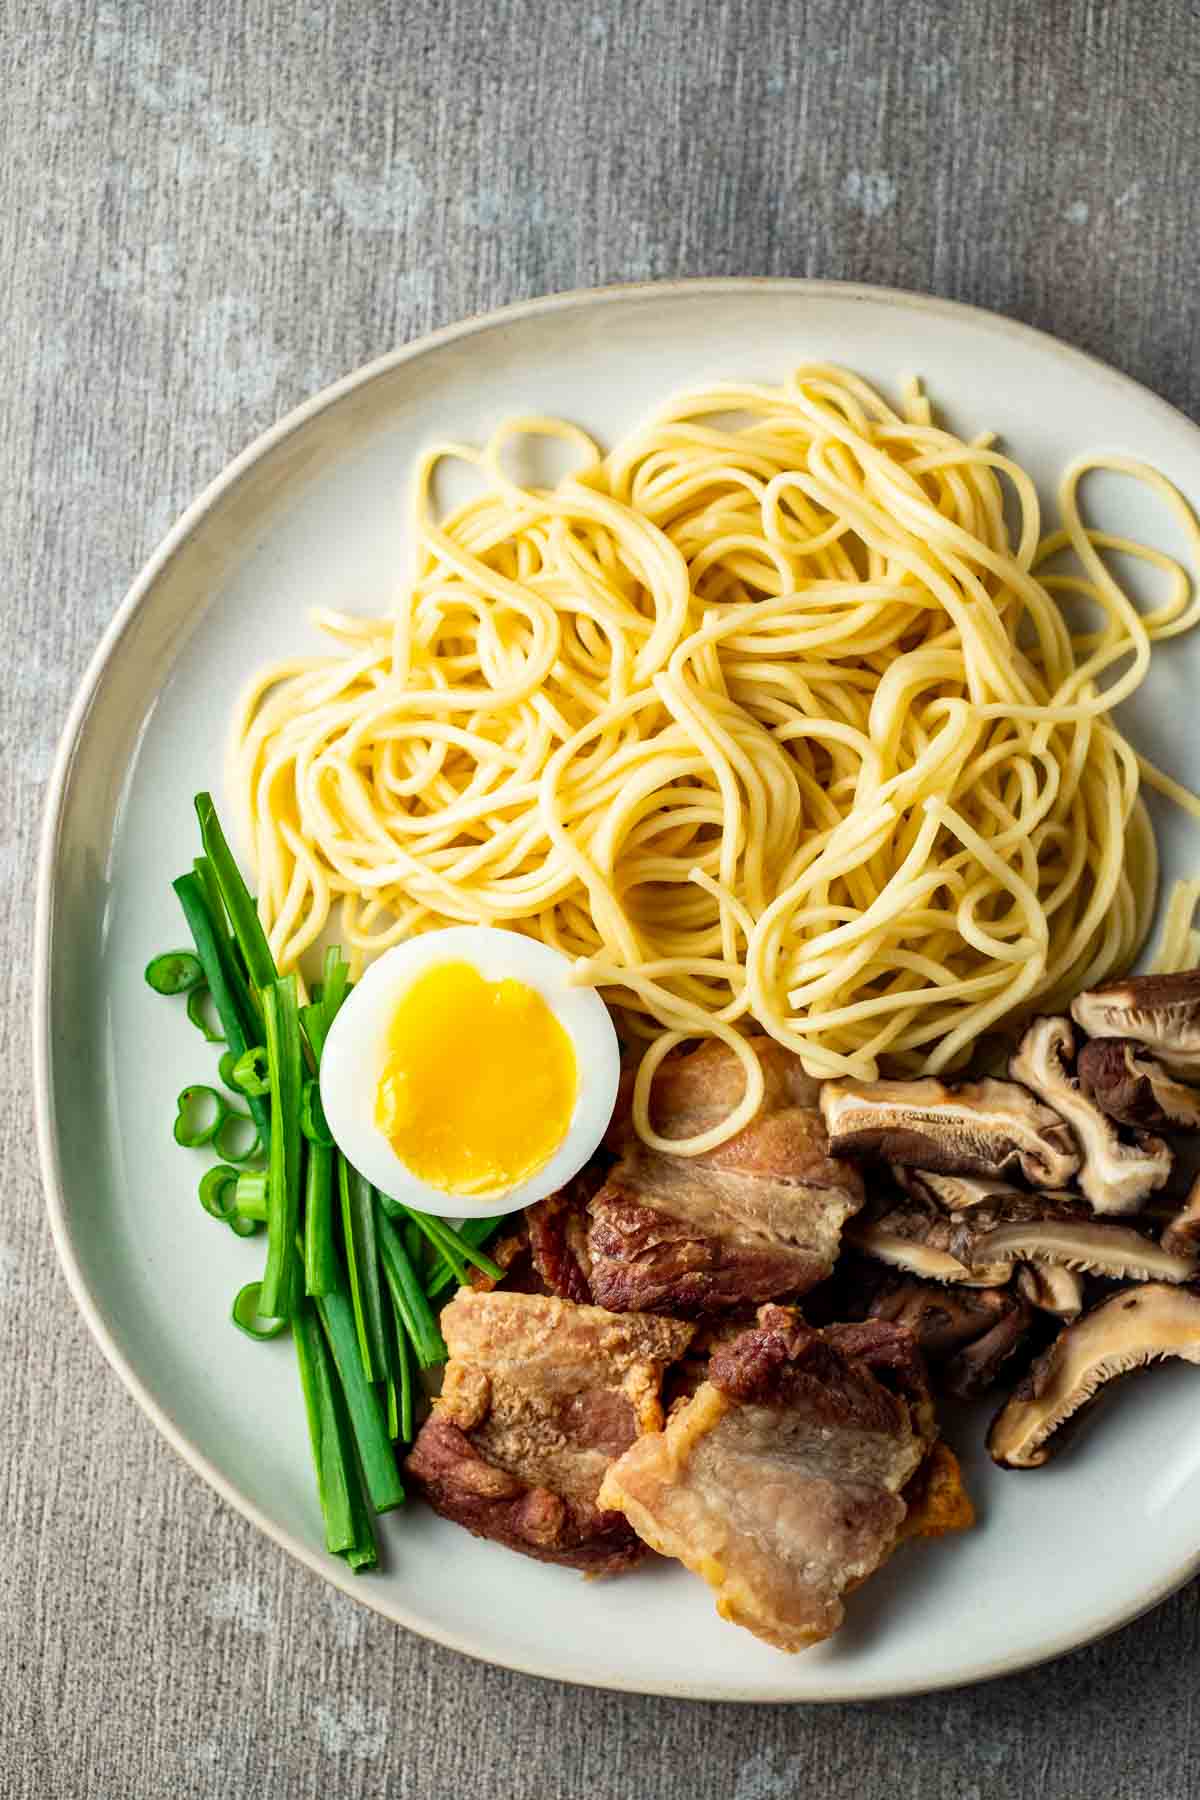 a plate of noodles and pork belly with a halved egg and green onions